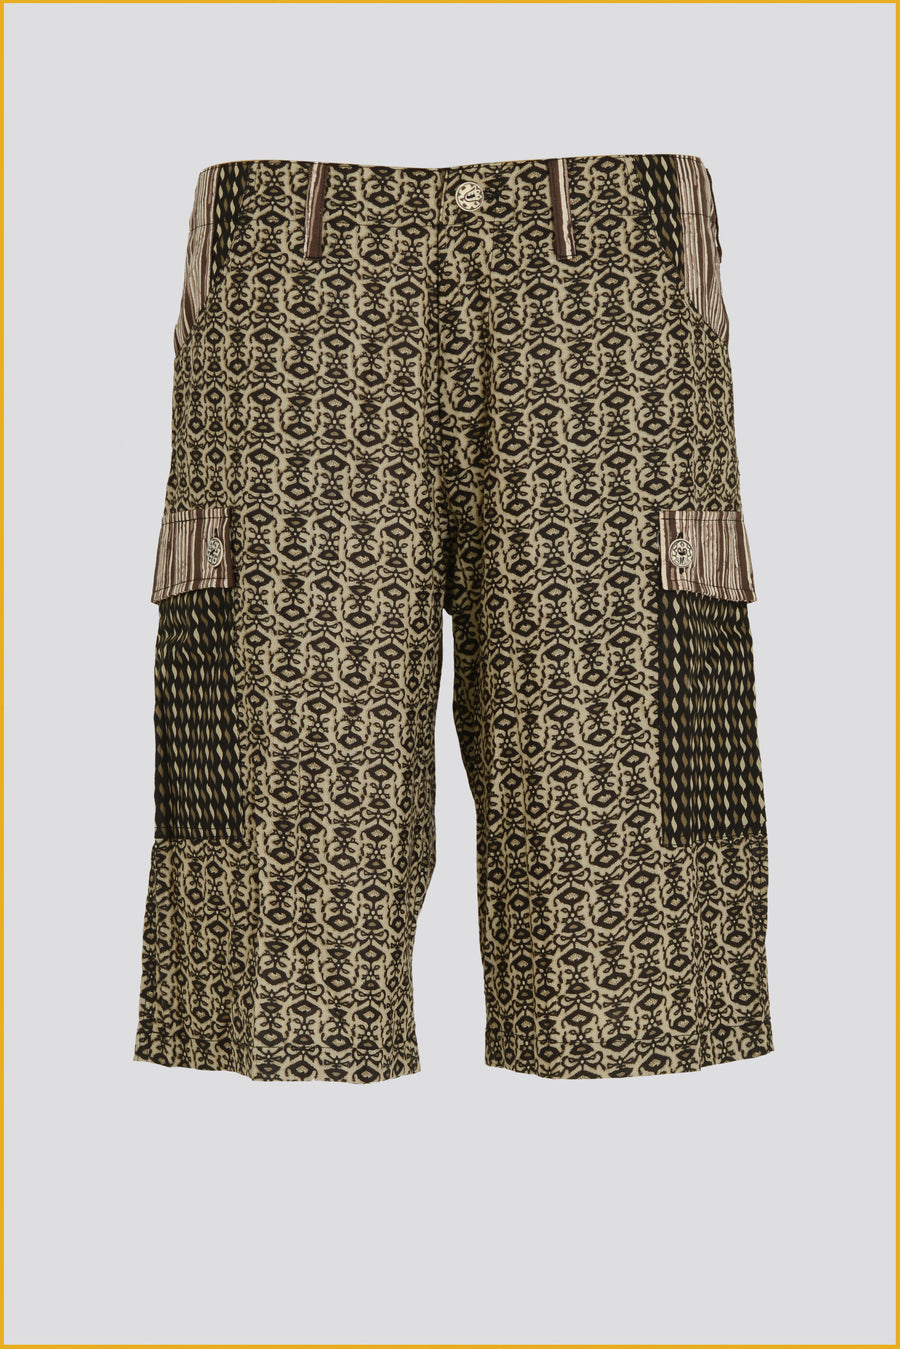 Hildo - Cotton Printed Pants With Hand Carved Bone Buttons (7424909967556)